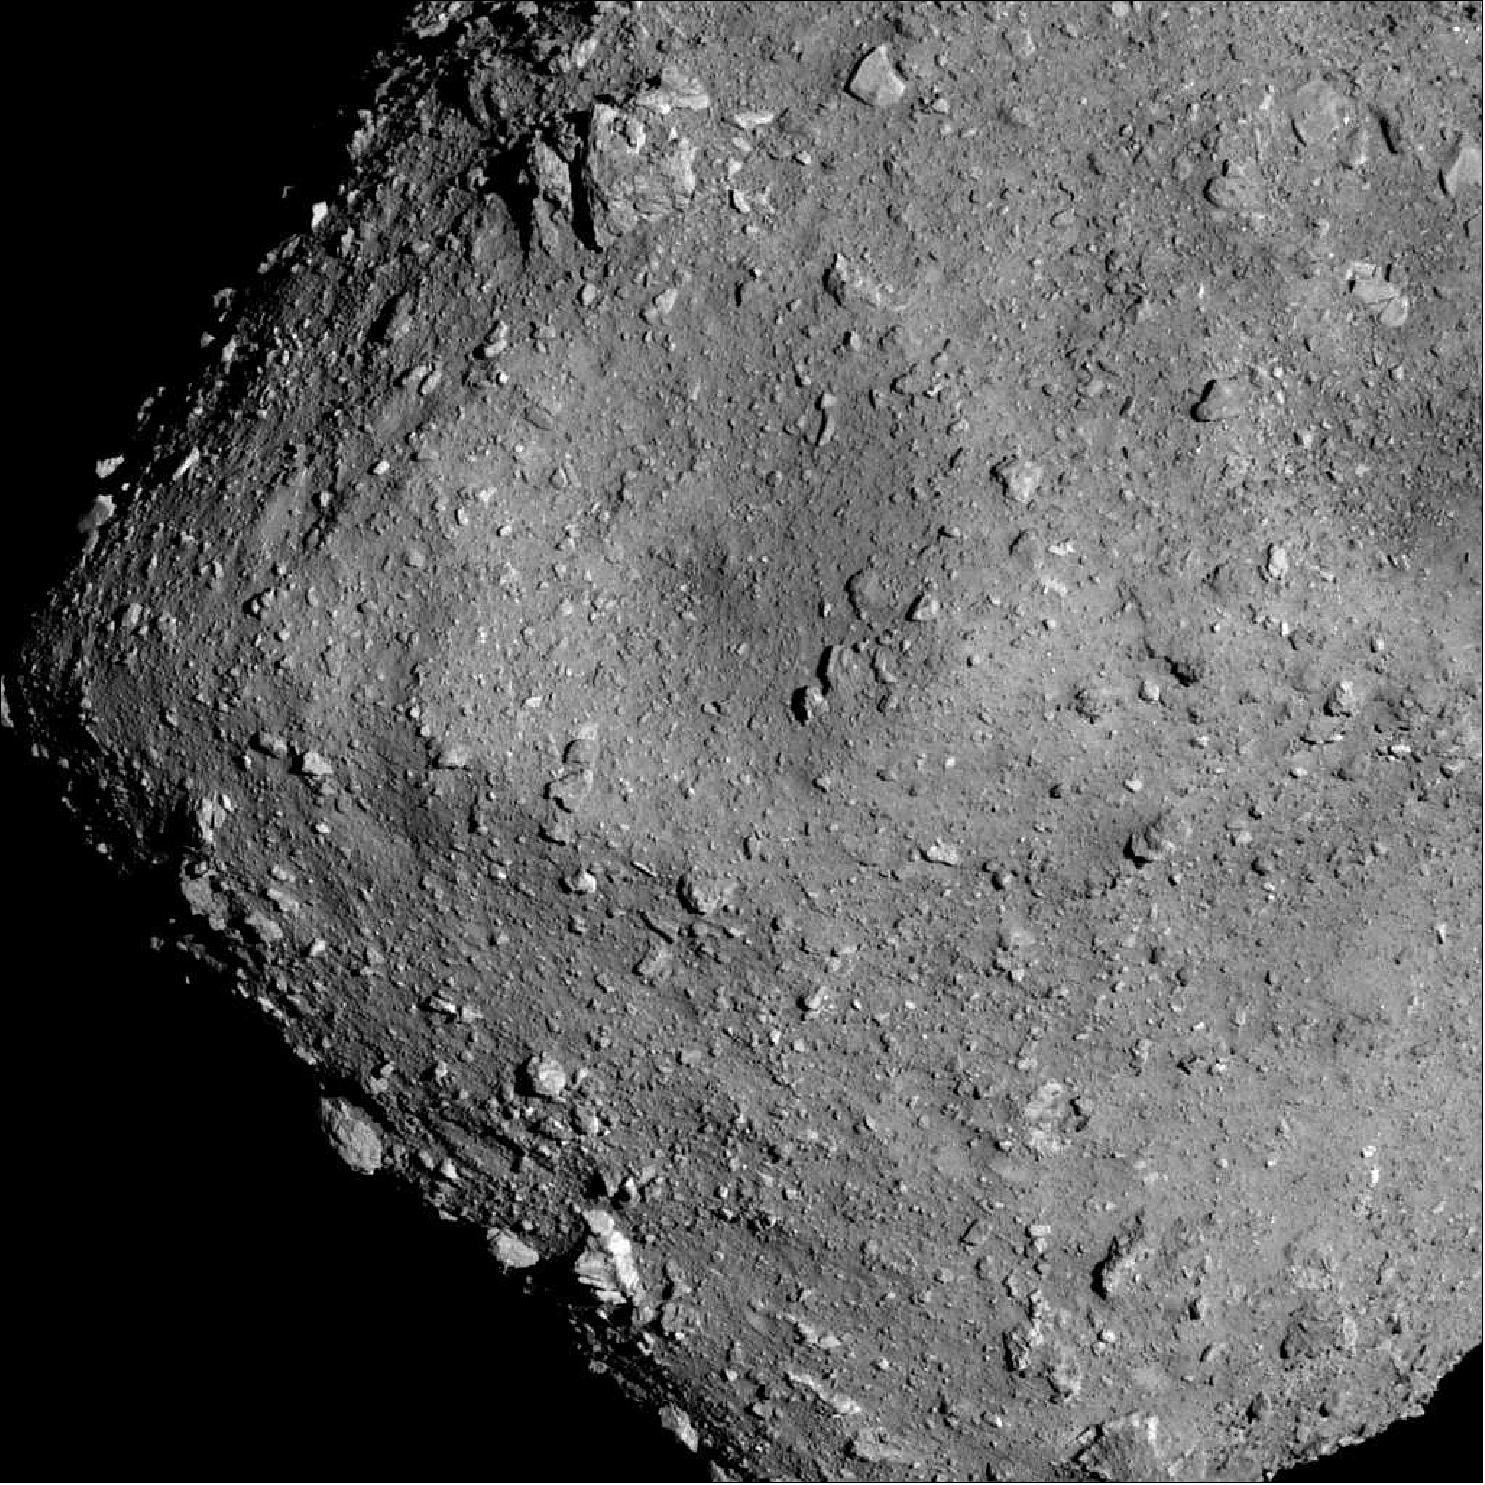 Figure 98: Asteroid Ryugu from an altitude of 6 km. The image was captured with ONC-T (Optical Navigation Camera - Telescopic) on July 20, 2018 at around 16:00 JST (image credit: JAXA, University of Tokyo, Kochi University, Rikkyo University, Nagoya University, Chiba Institute of Technology, Meiji University, University of Aizu, AIST)